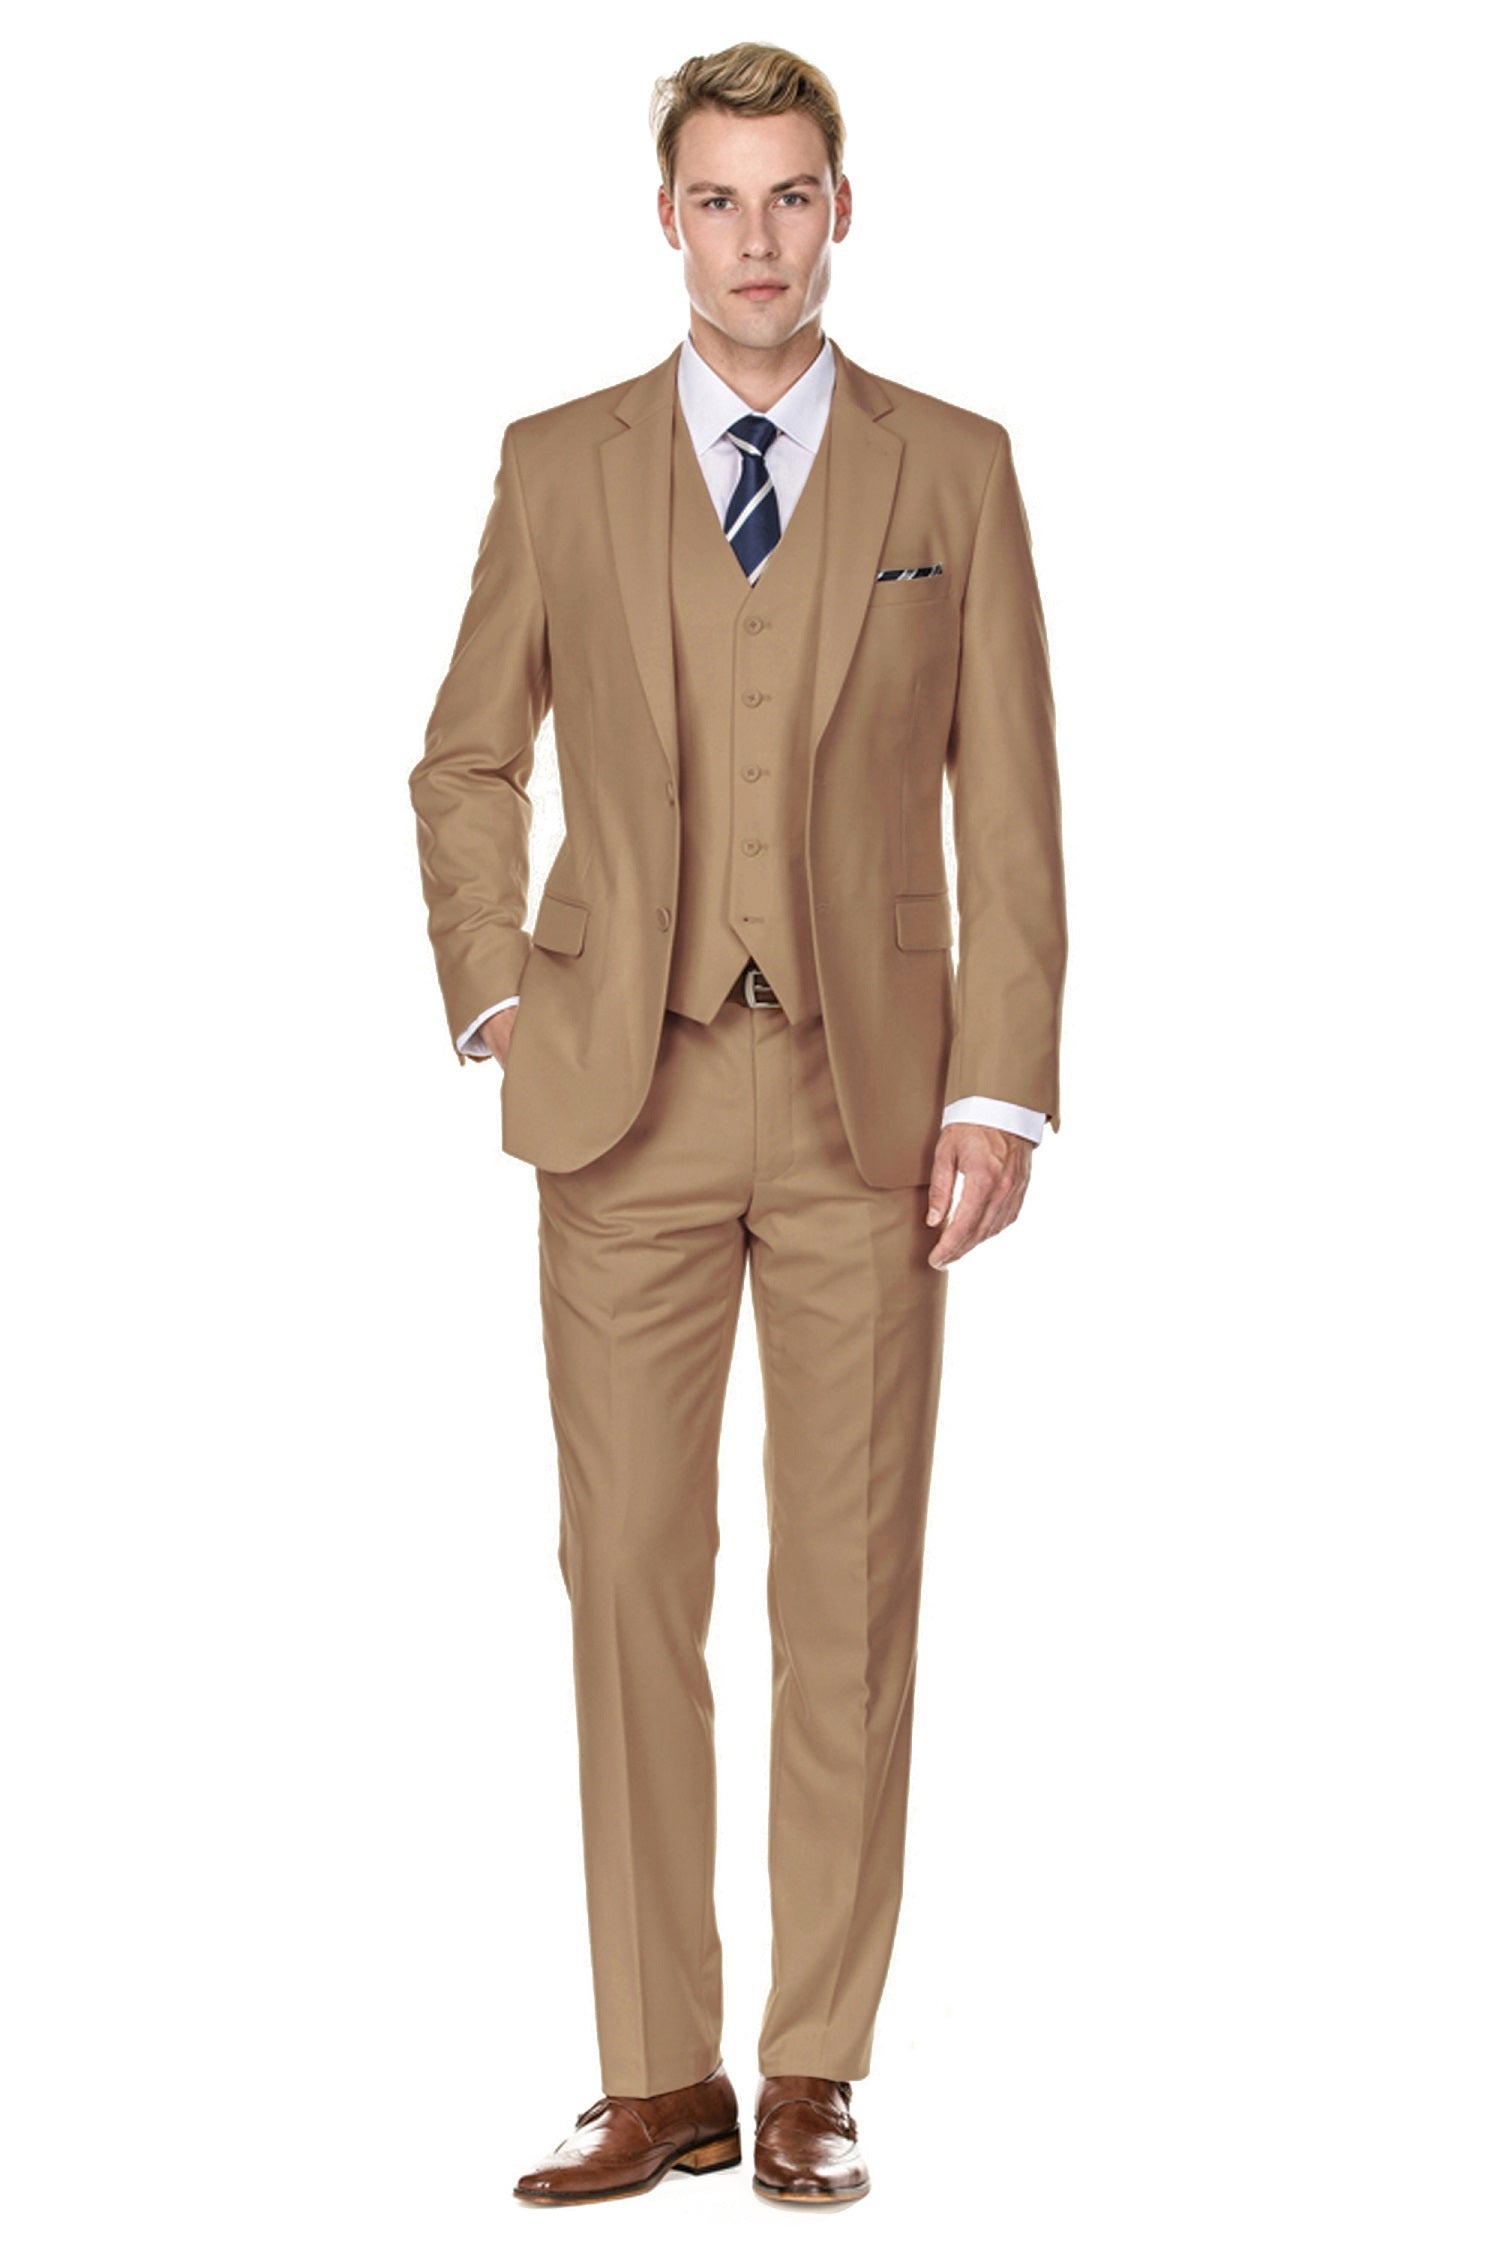 Peaked Lapel Light Brown Tuxedo Suit For Groom, Wedding, Prom, And Formal  Events Set New Look Jackets And Pants From Foreverbridal, $66.33 |  DHgate.Com